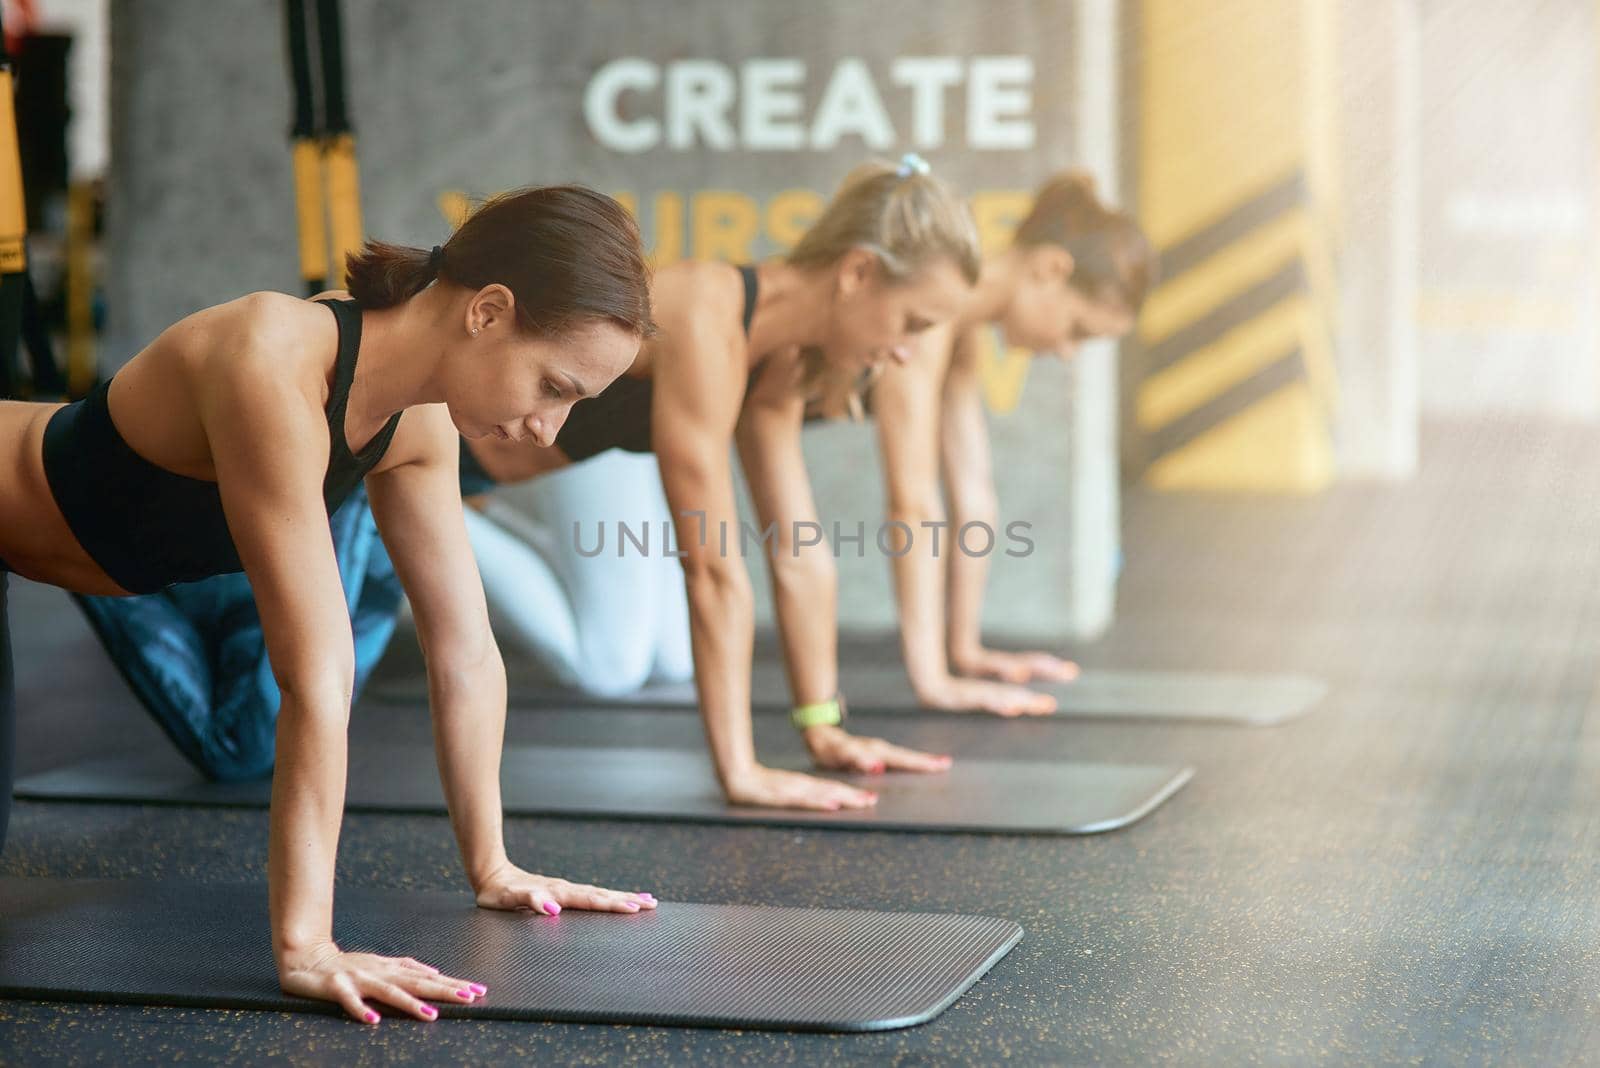 Create yourself. Group of three young sportive women exercising with trx fitness straps at gym. Suspension training, workout, wellness and healthy lifestyle